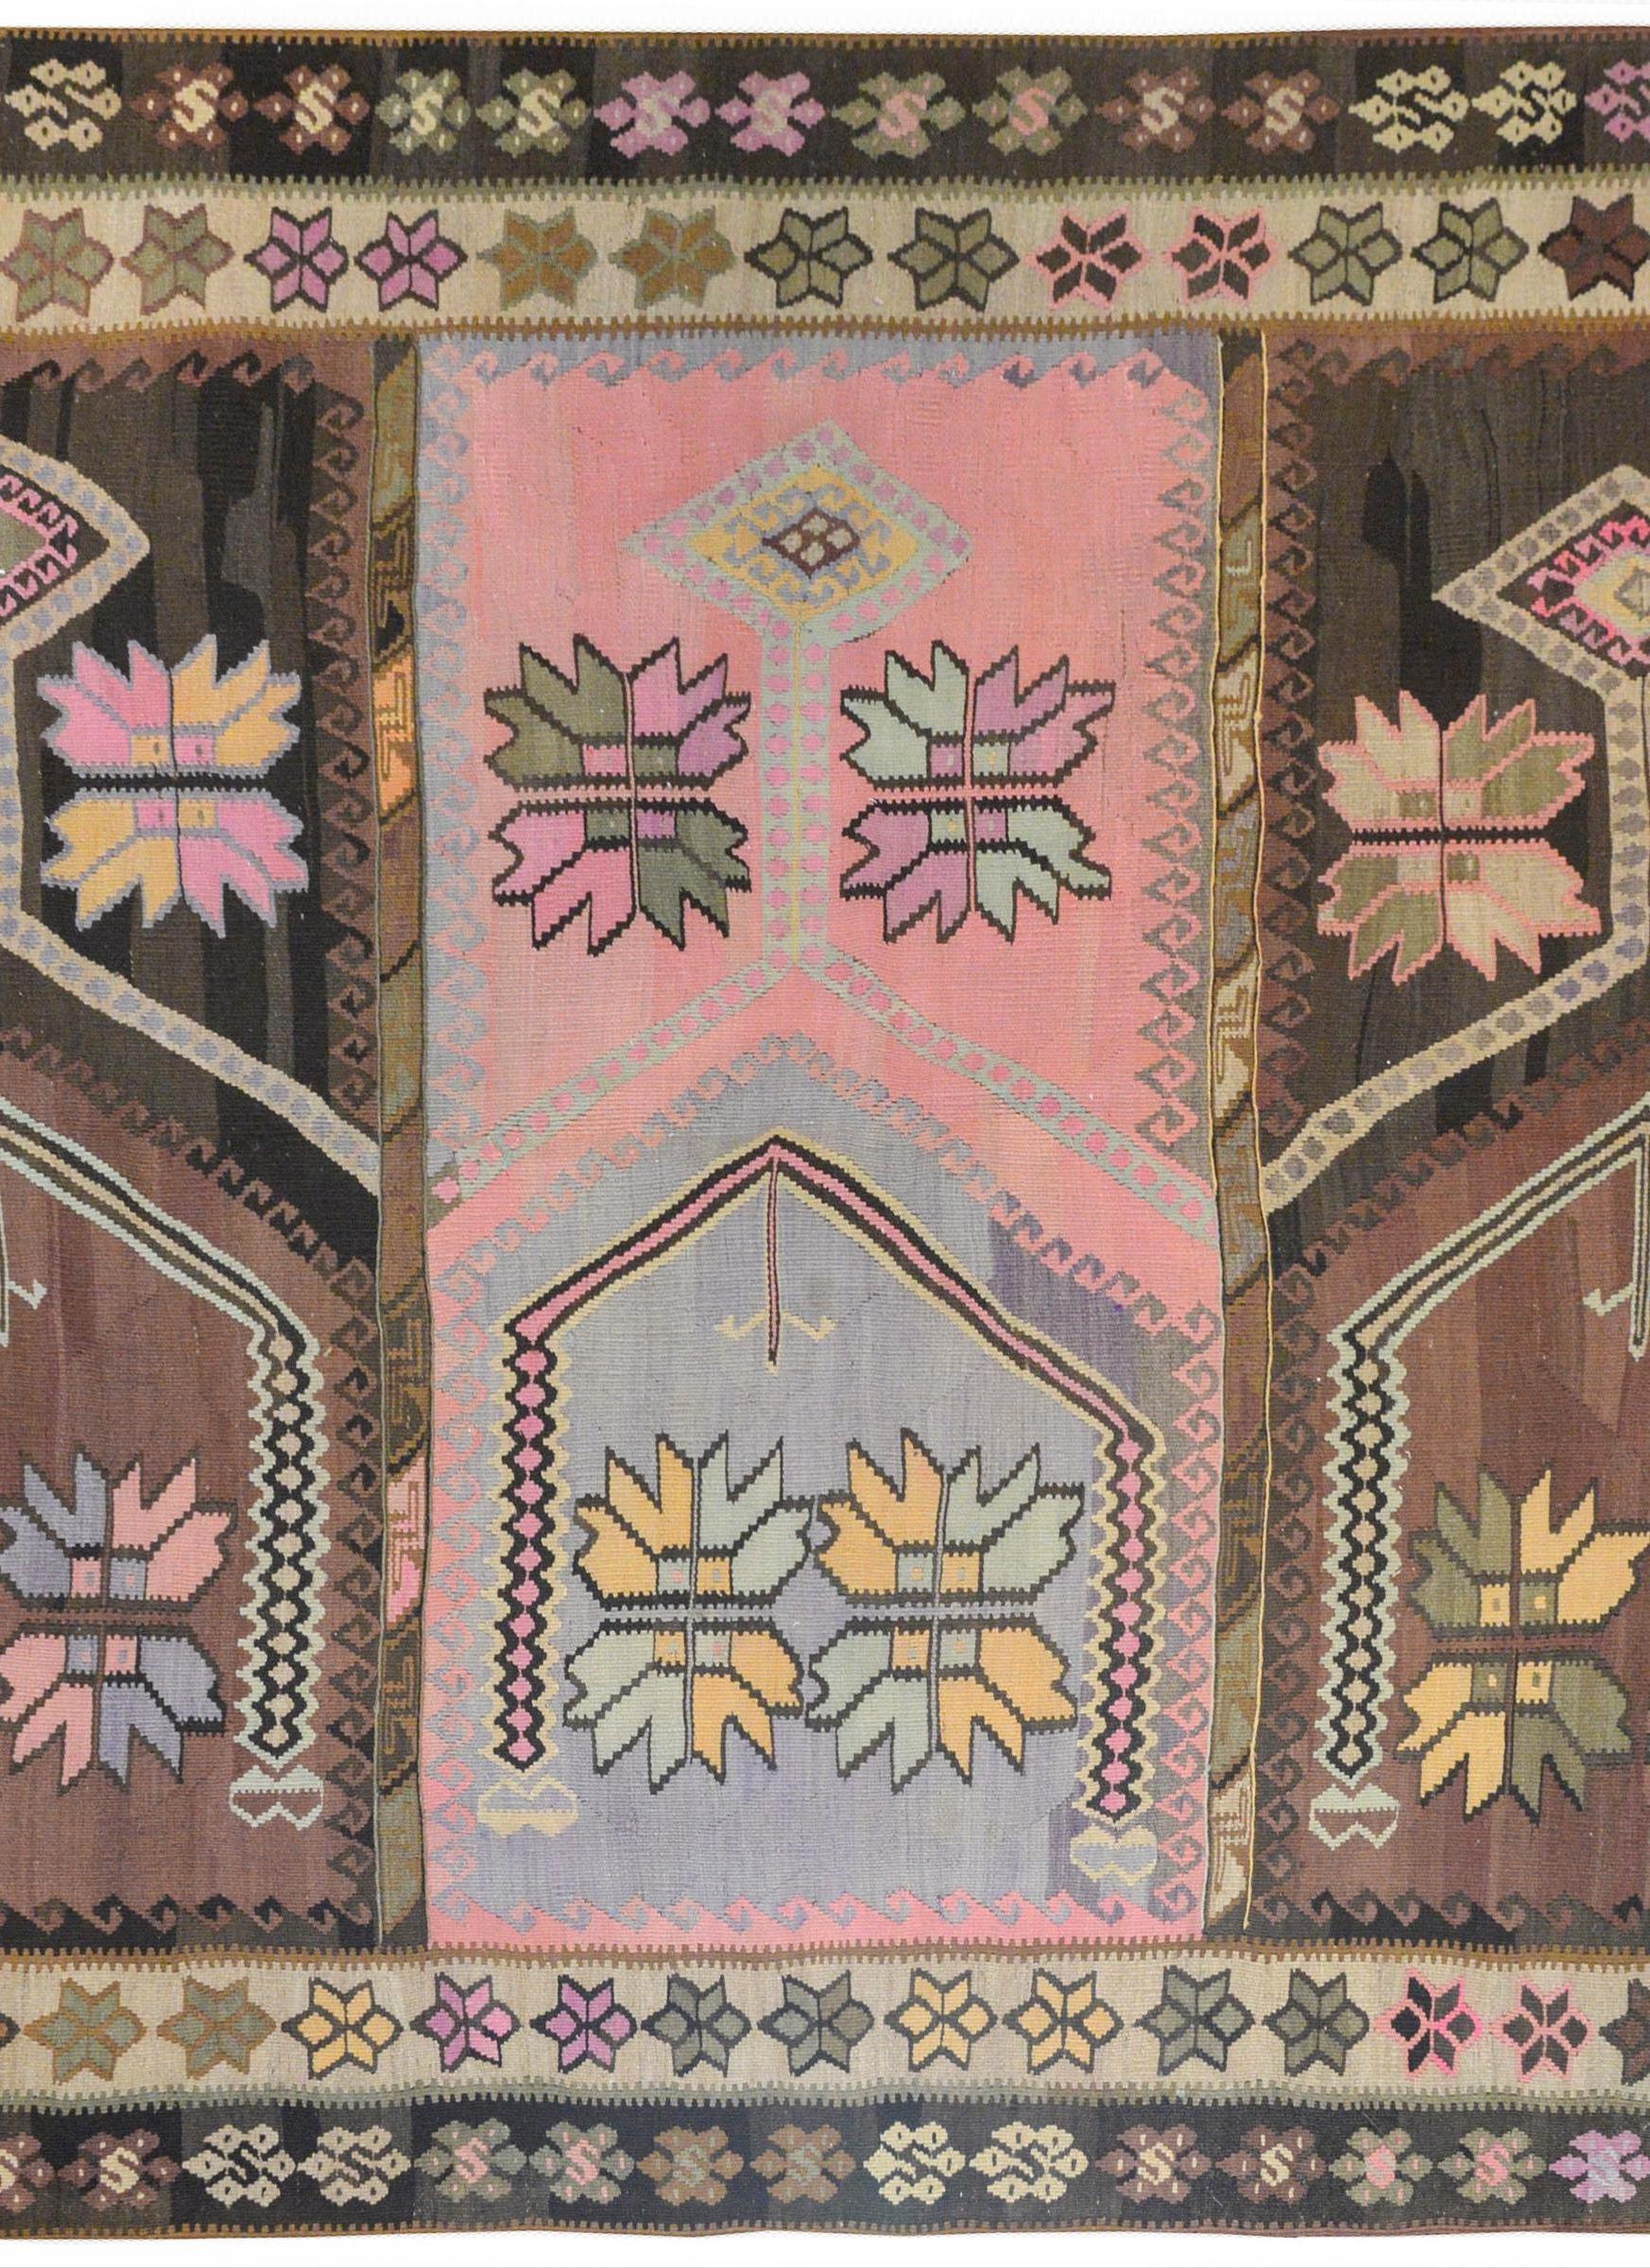 An early 20th century Turkish Anatolian Kilim rug with three central segmented panels, each with stylized flowers and surrounded by geometric wave patterns. The border is composed of two distinct stylized floral patterned stripes.